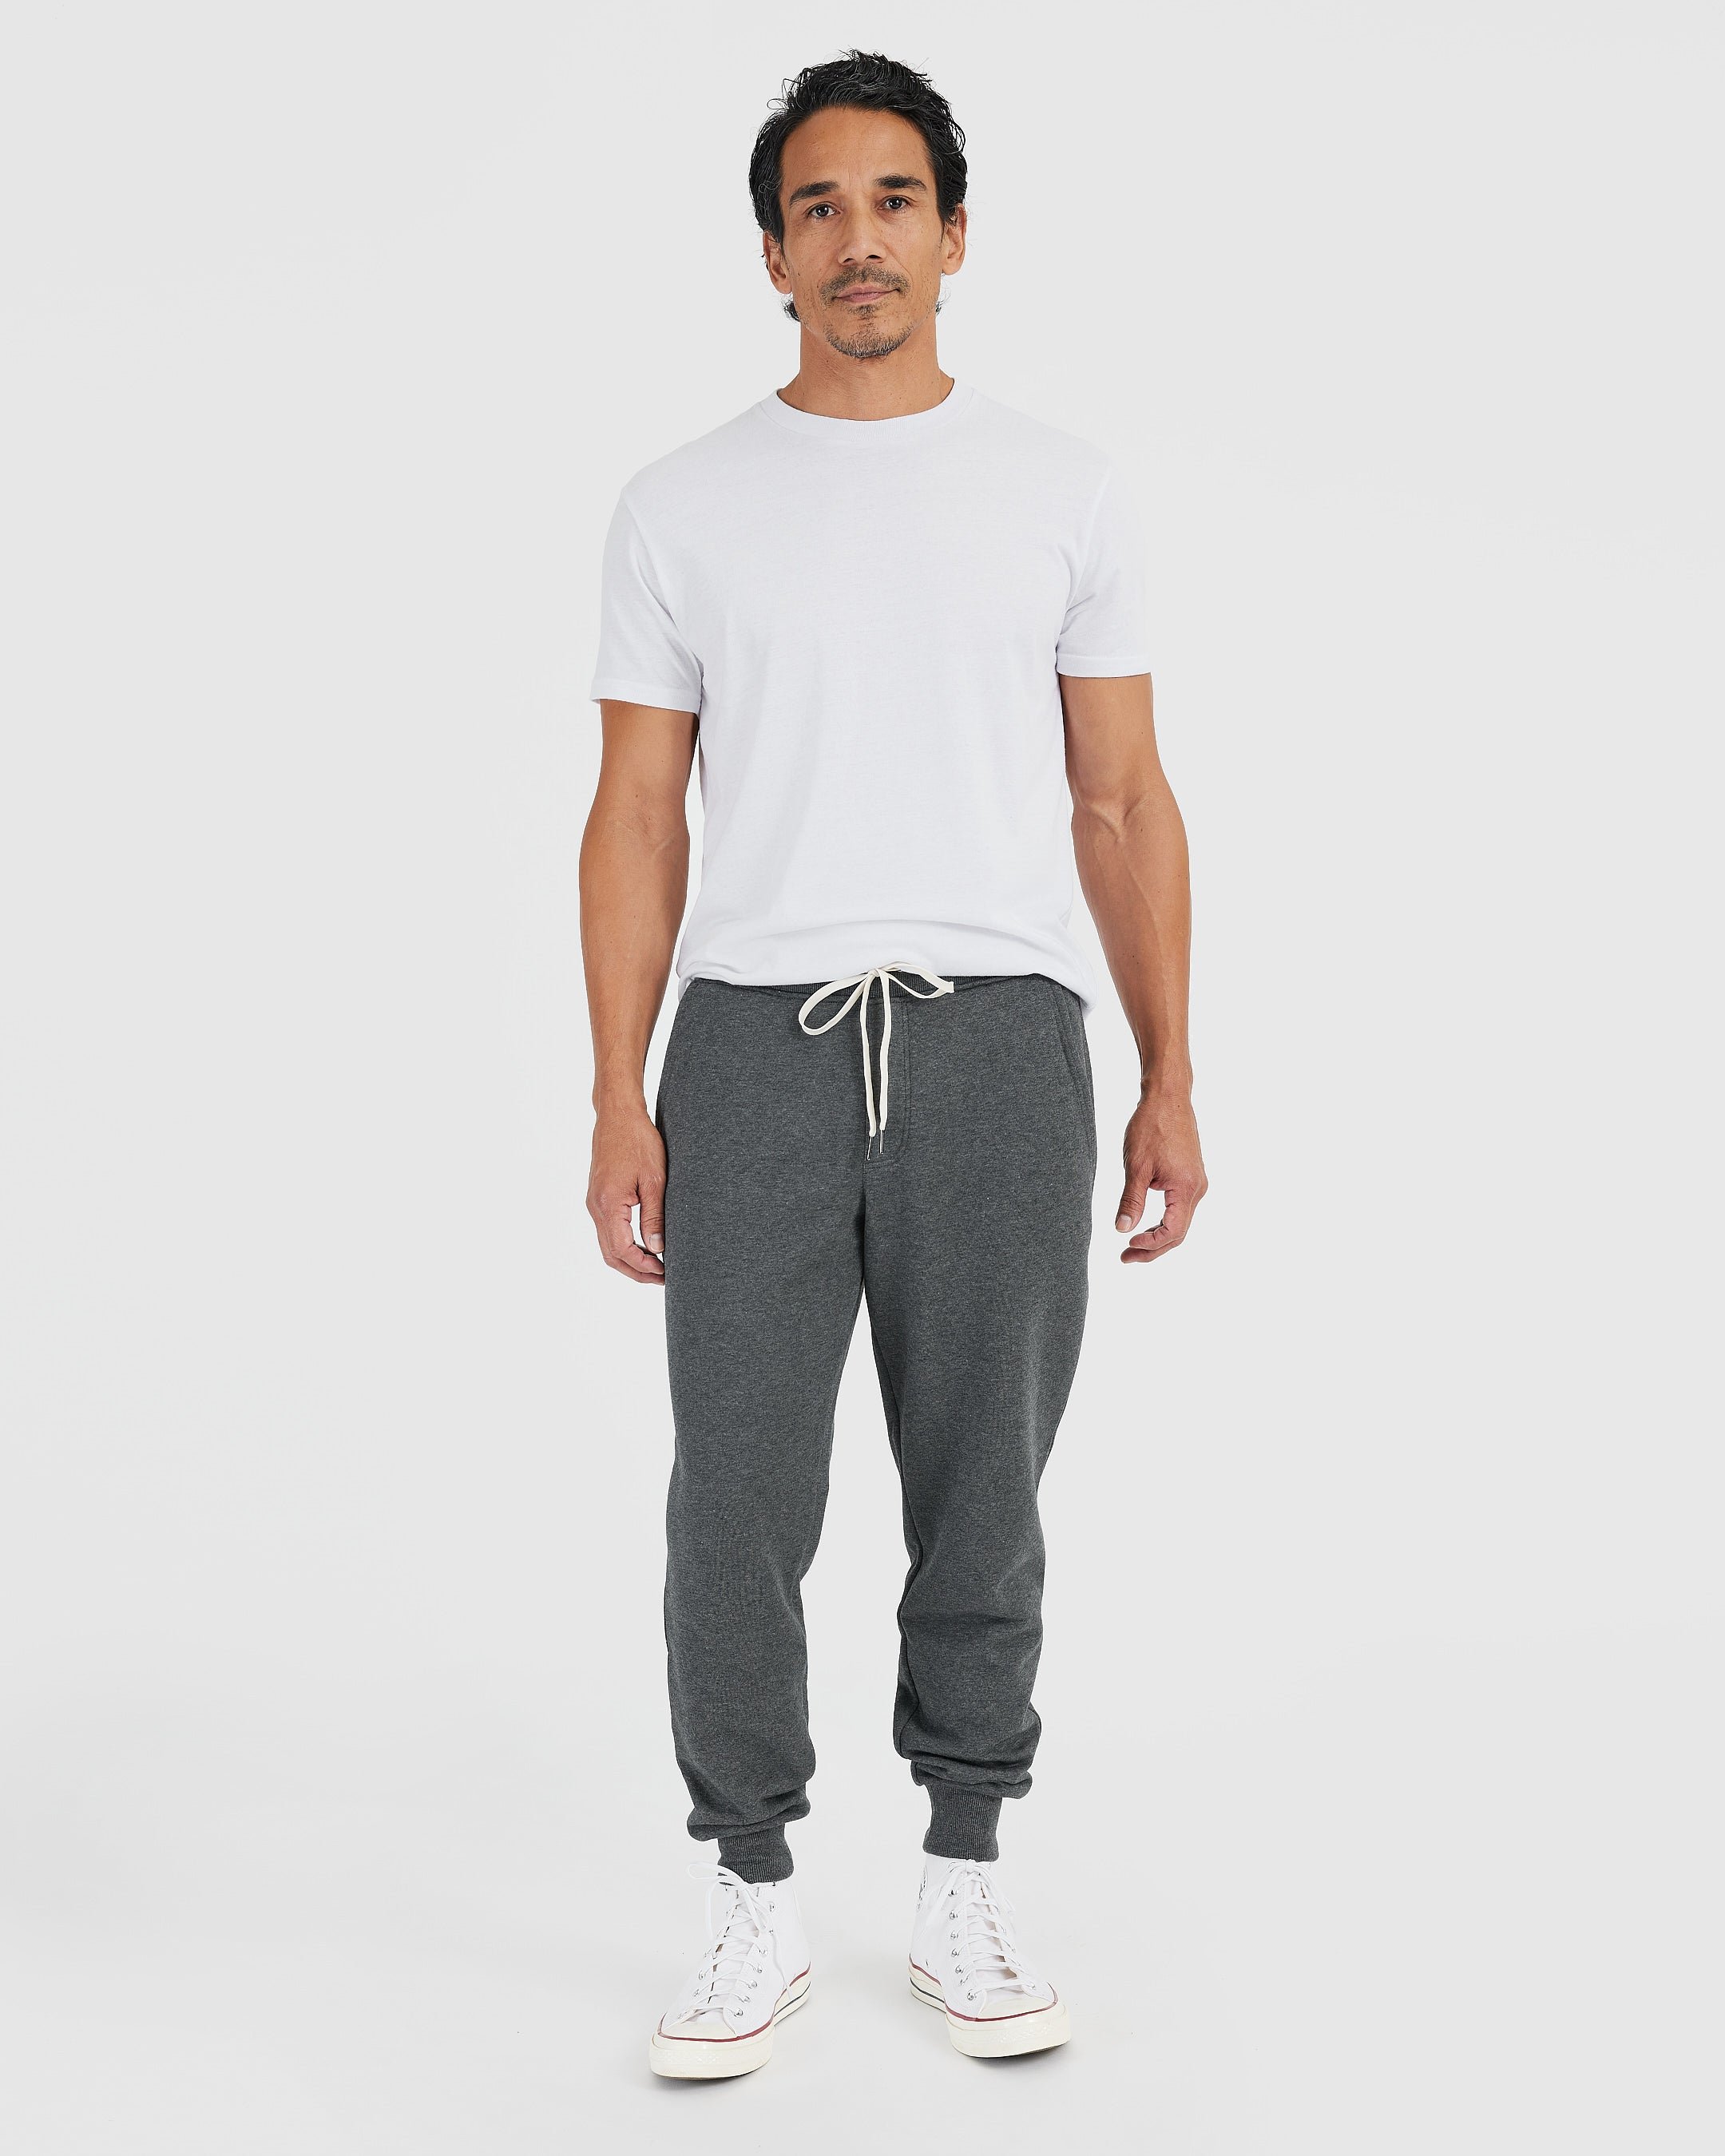 Charcoal Gray Fleece French Terry Jogger